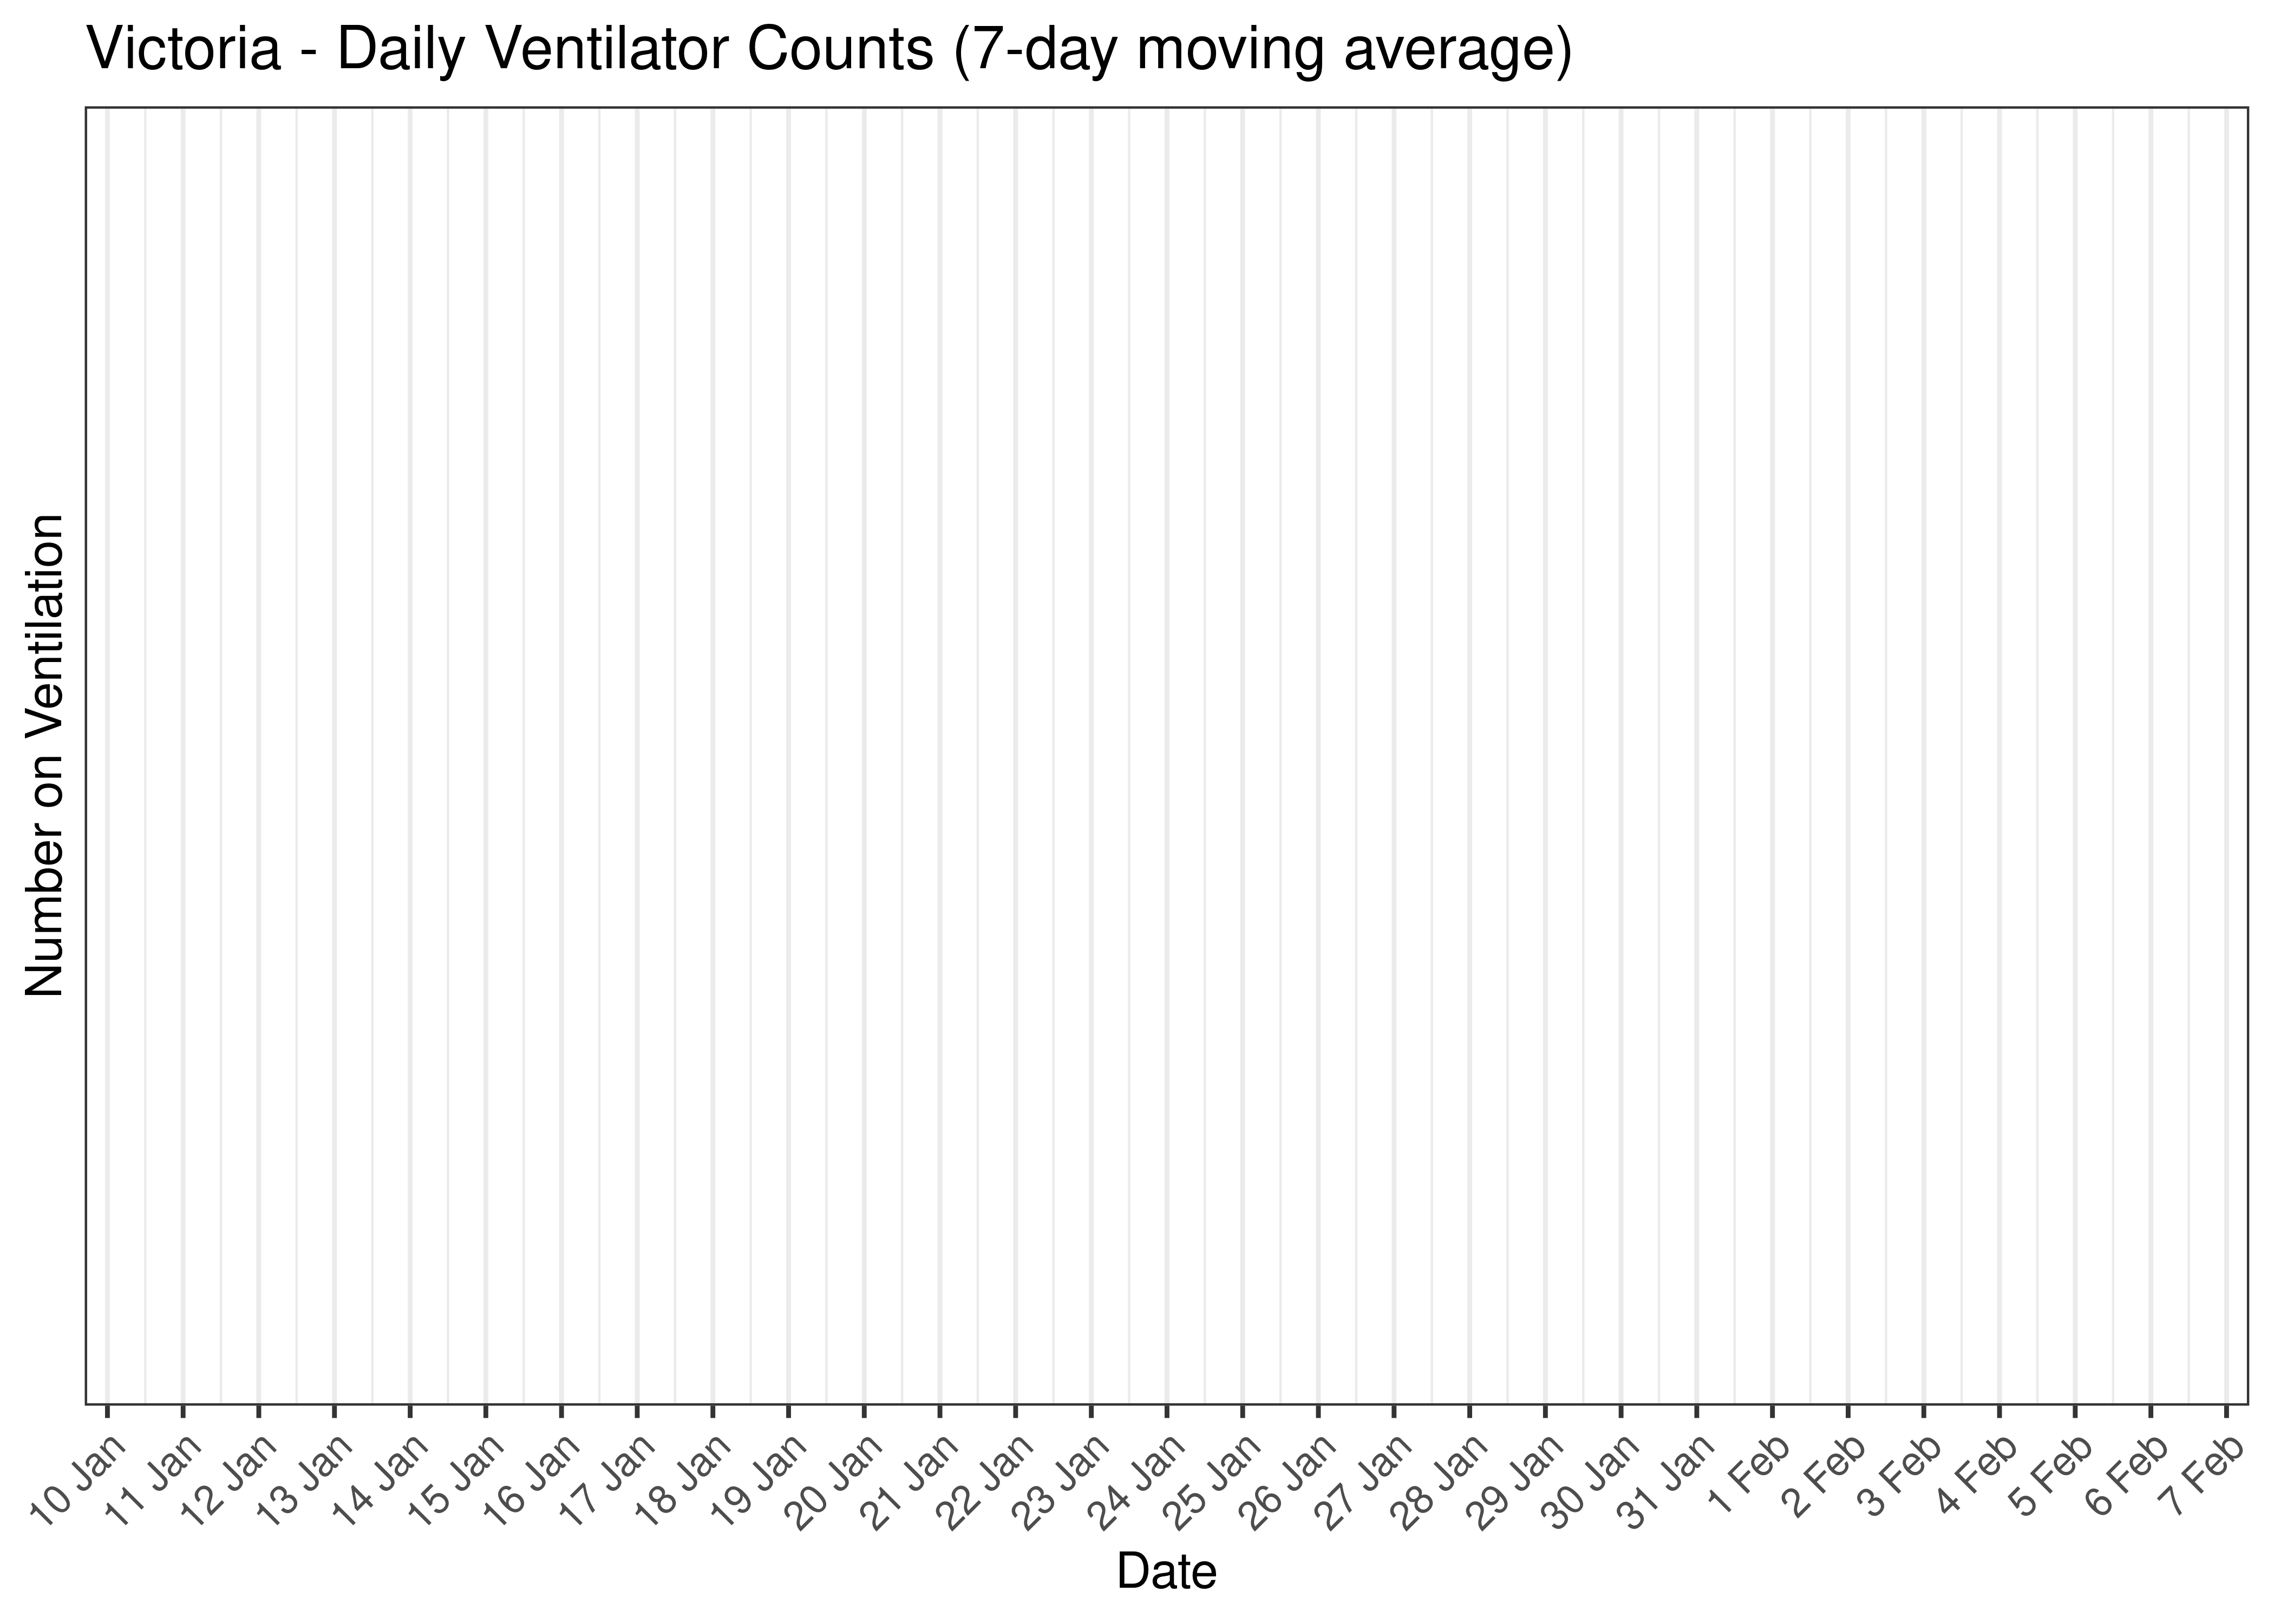 Victoria - Daily Tests for Last 30 Days (7-day moving average)